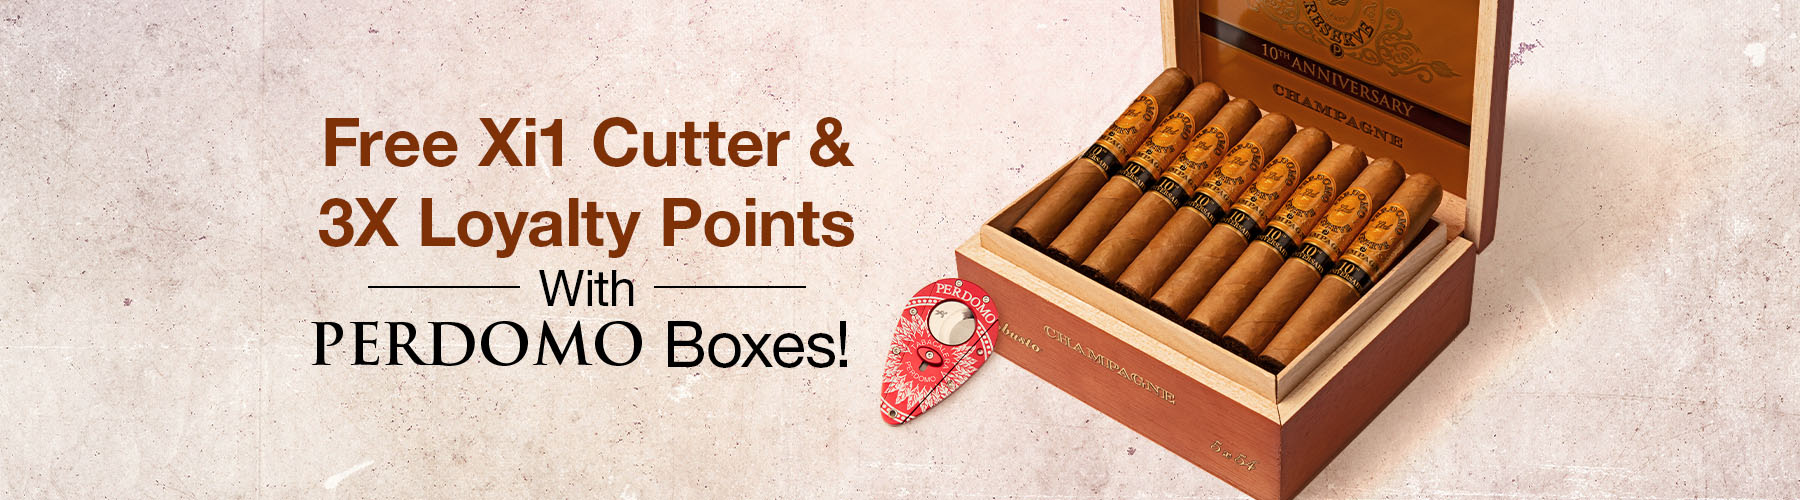 Free Xi1 Cutter & Loyalty Points with Perdomo boxes!